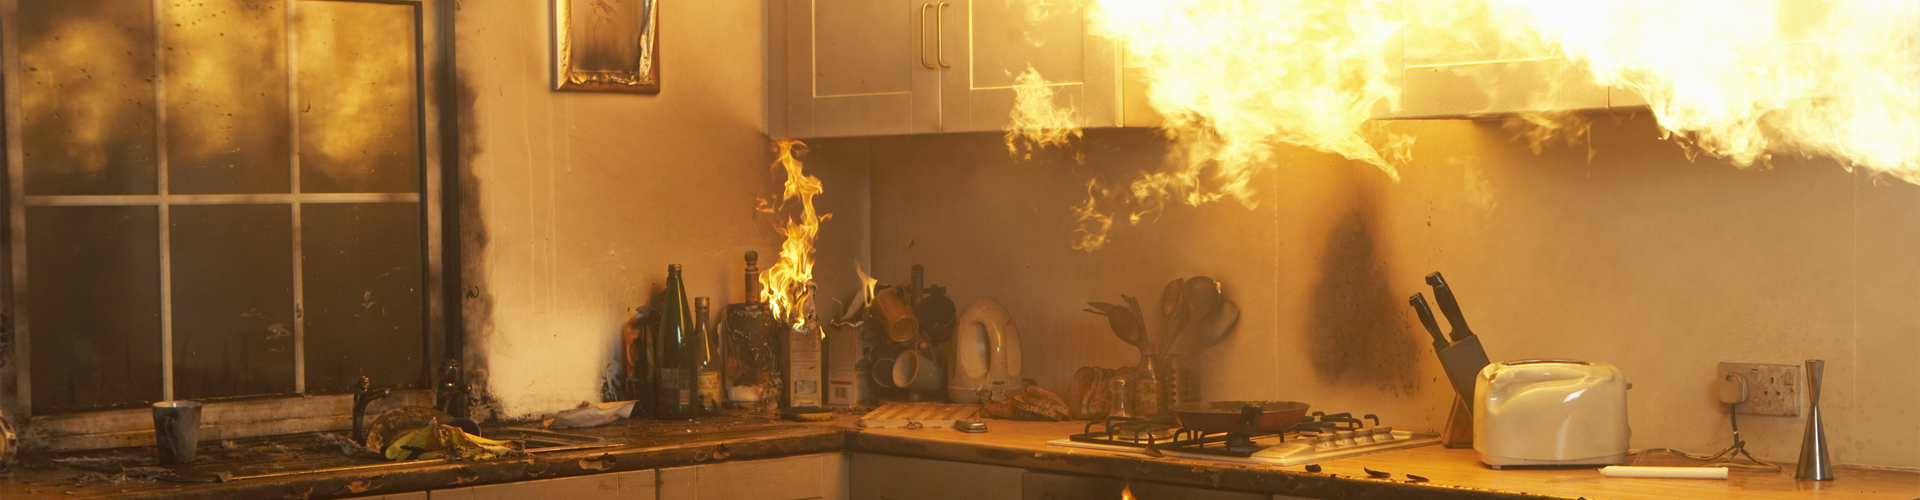 #Just1 distraction is all it takes to start a kitchen fire